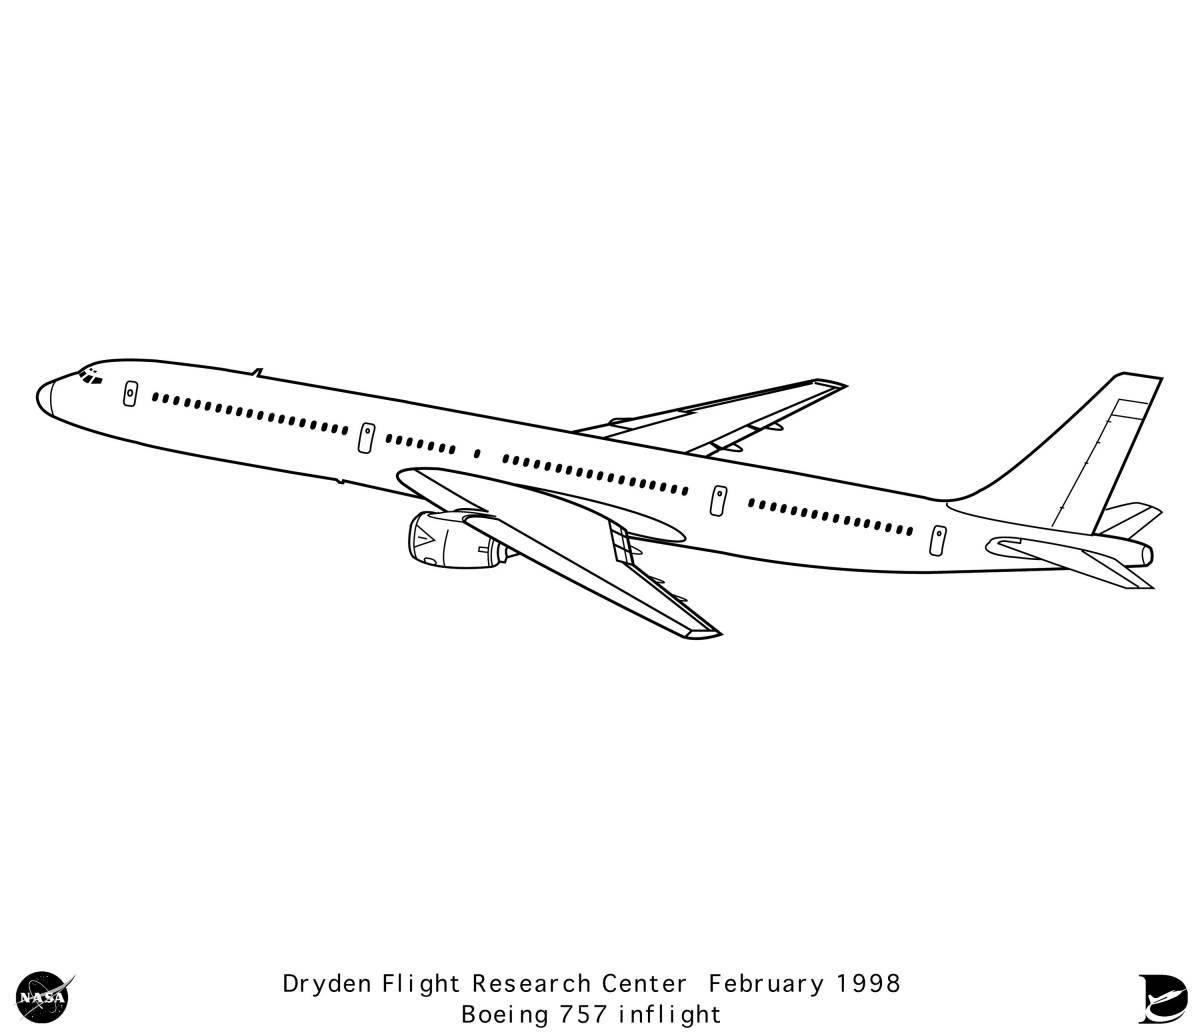 Coloring page charming boeing 777